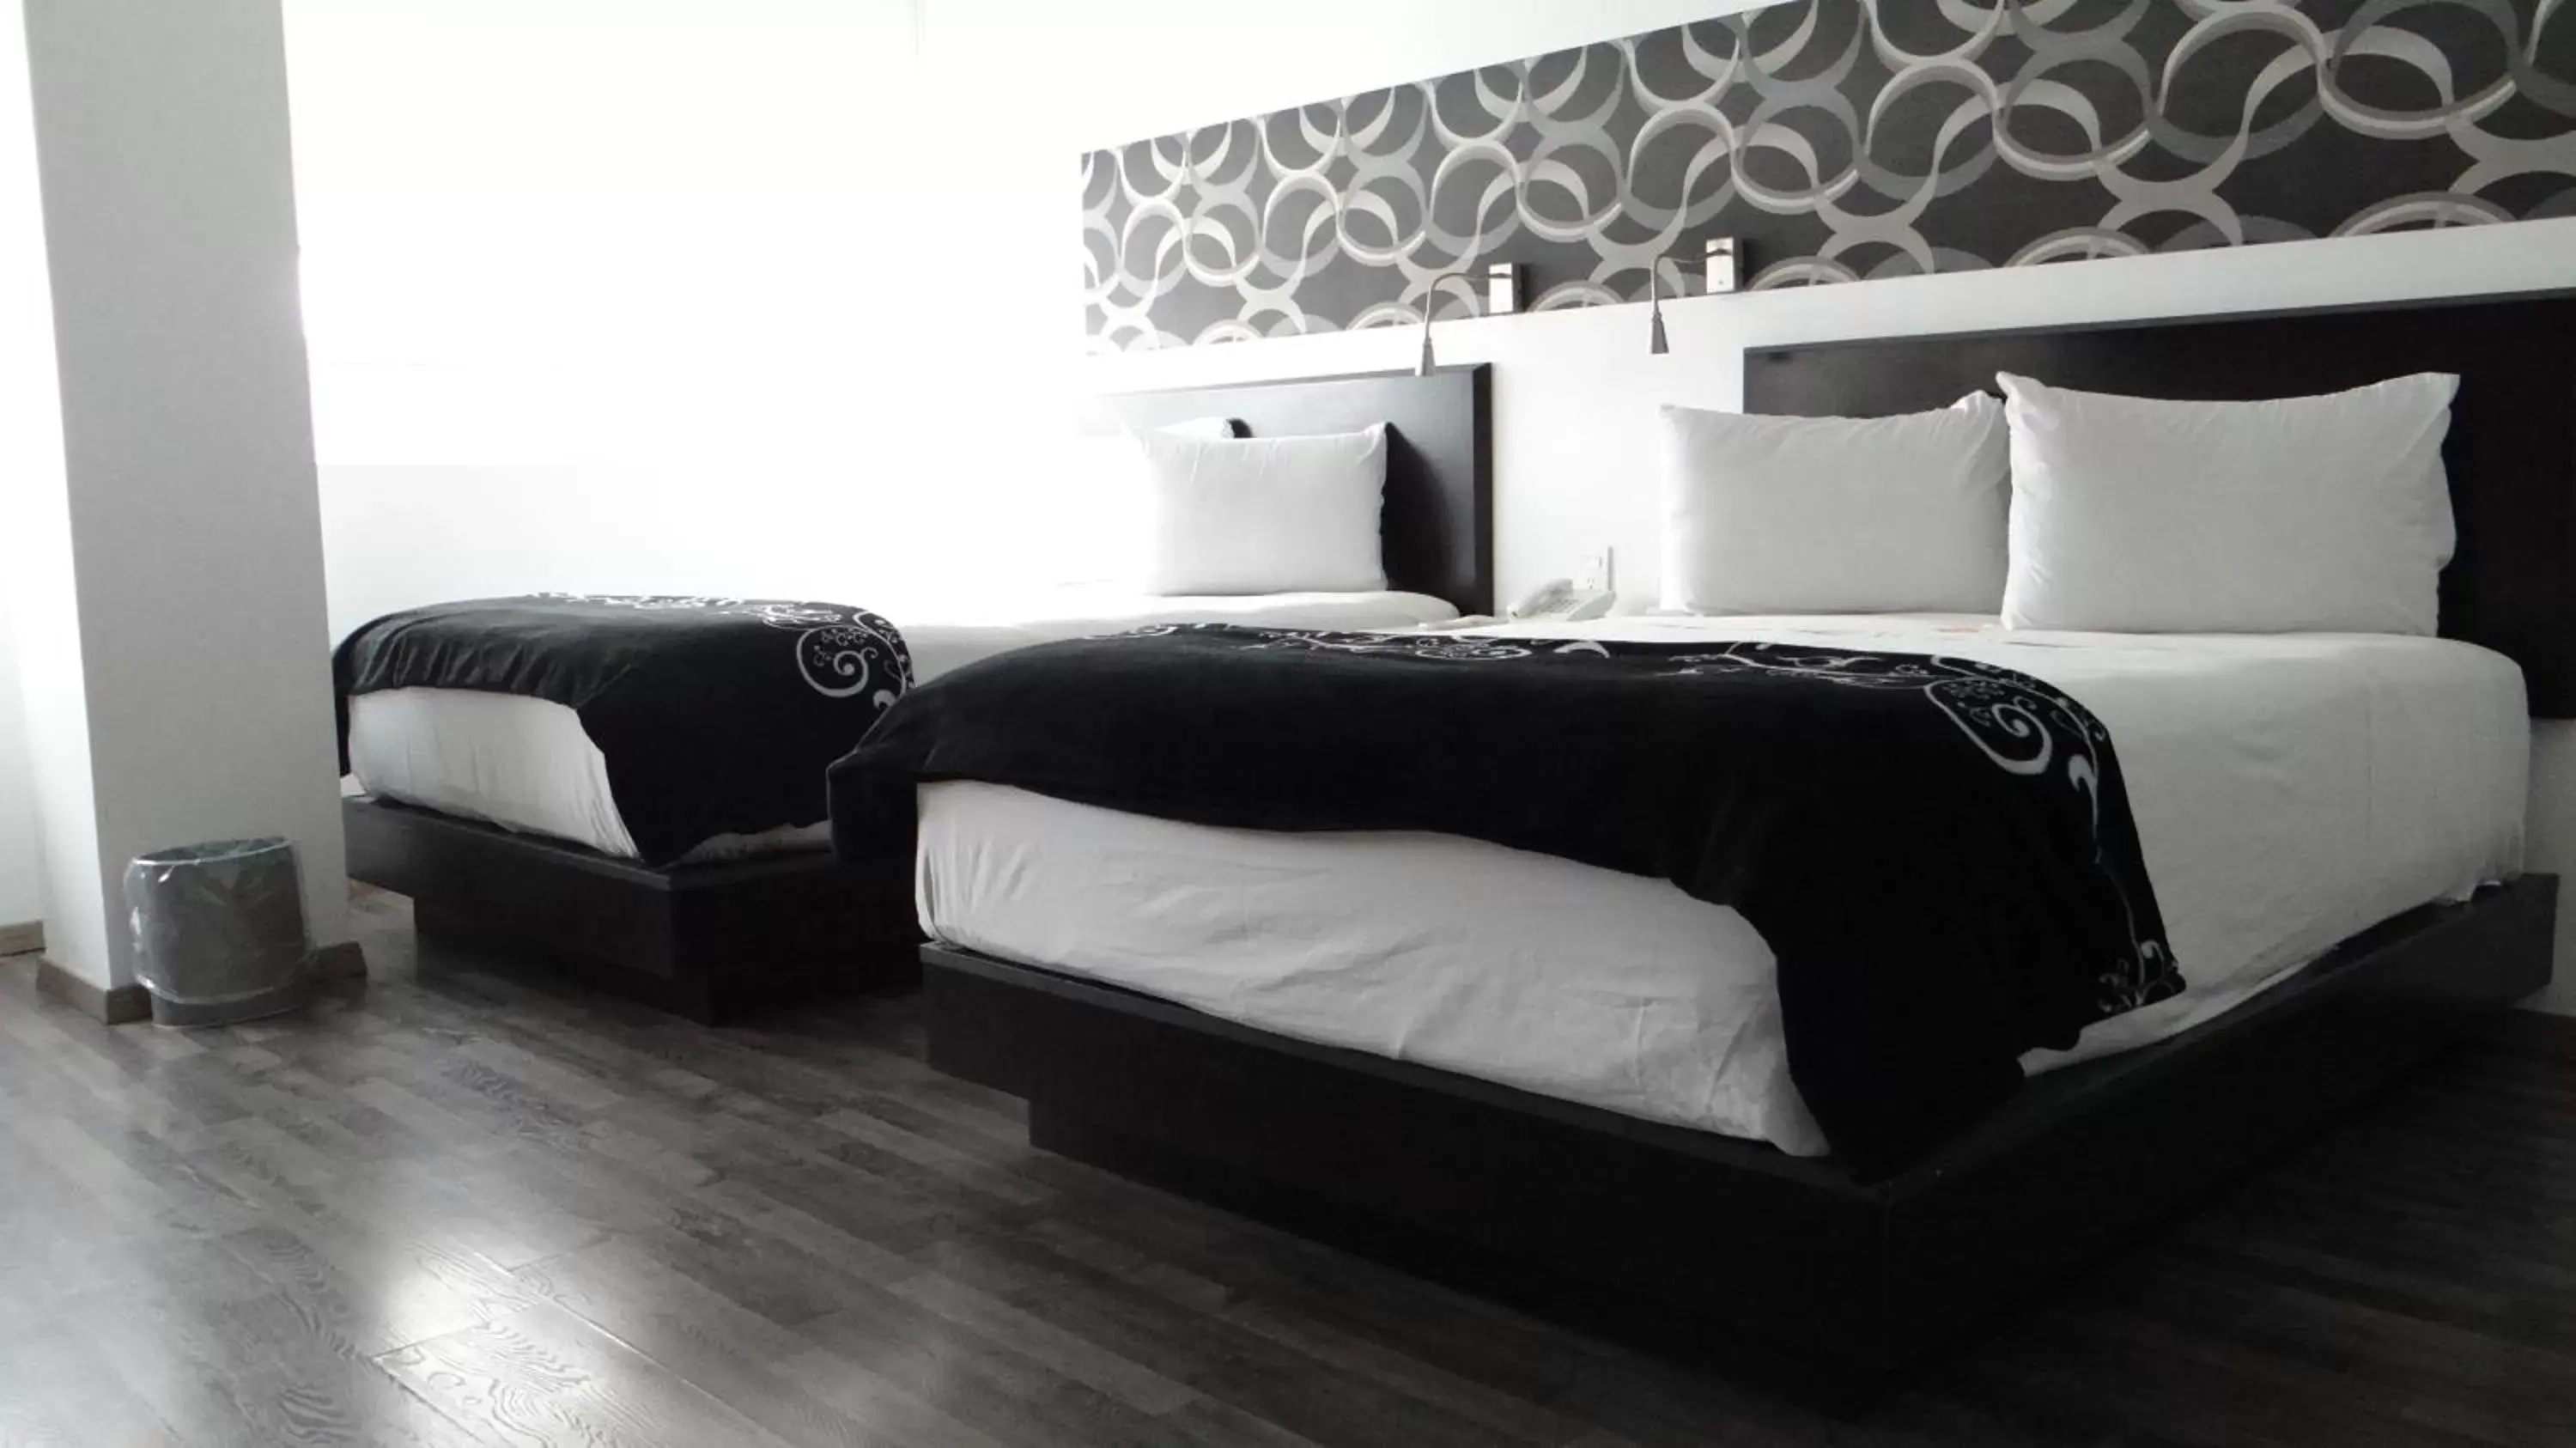 Bed in Hotel Black Mexico City